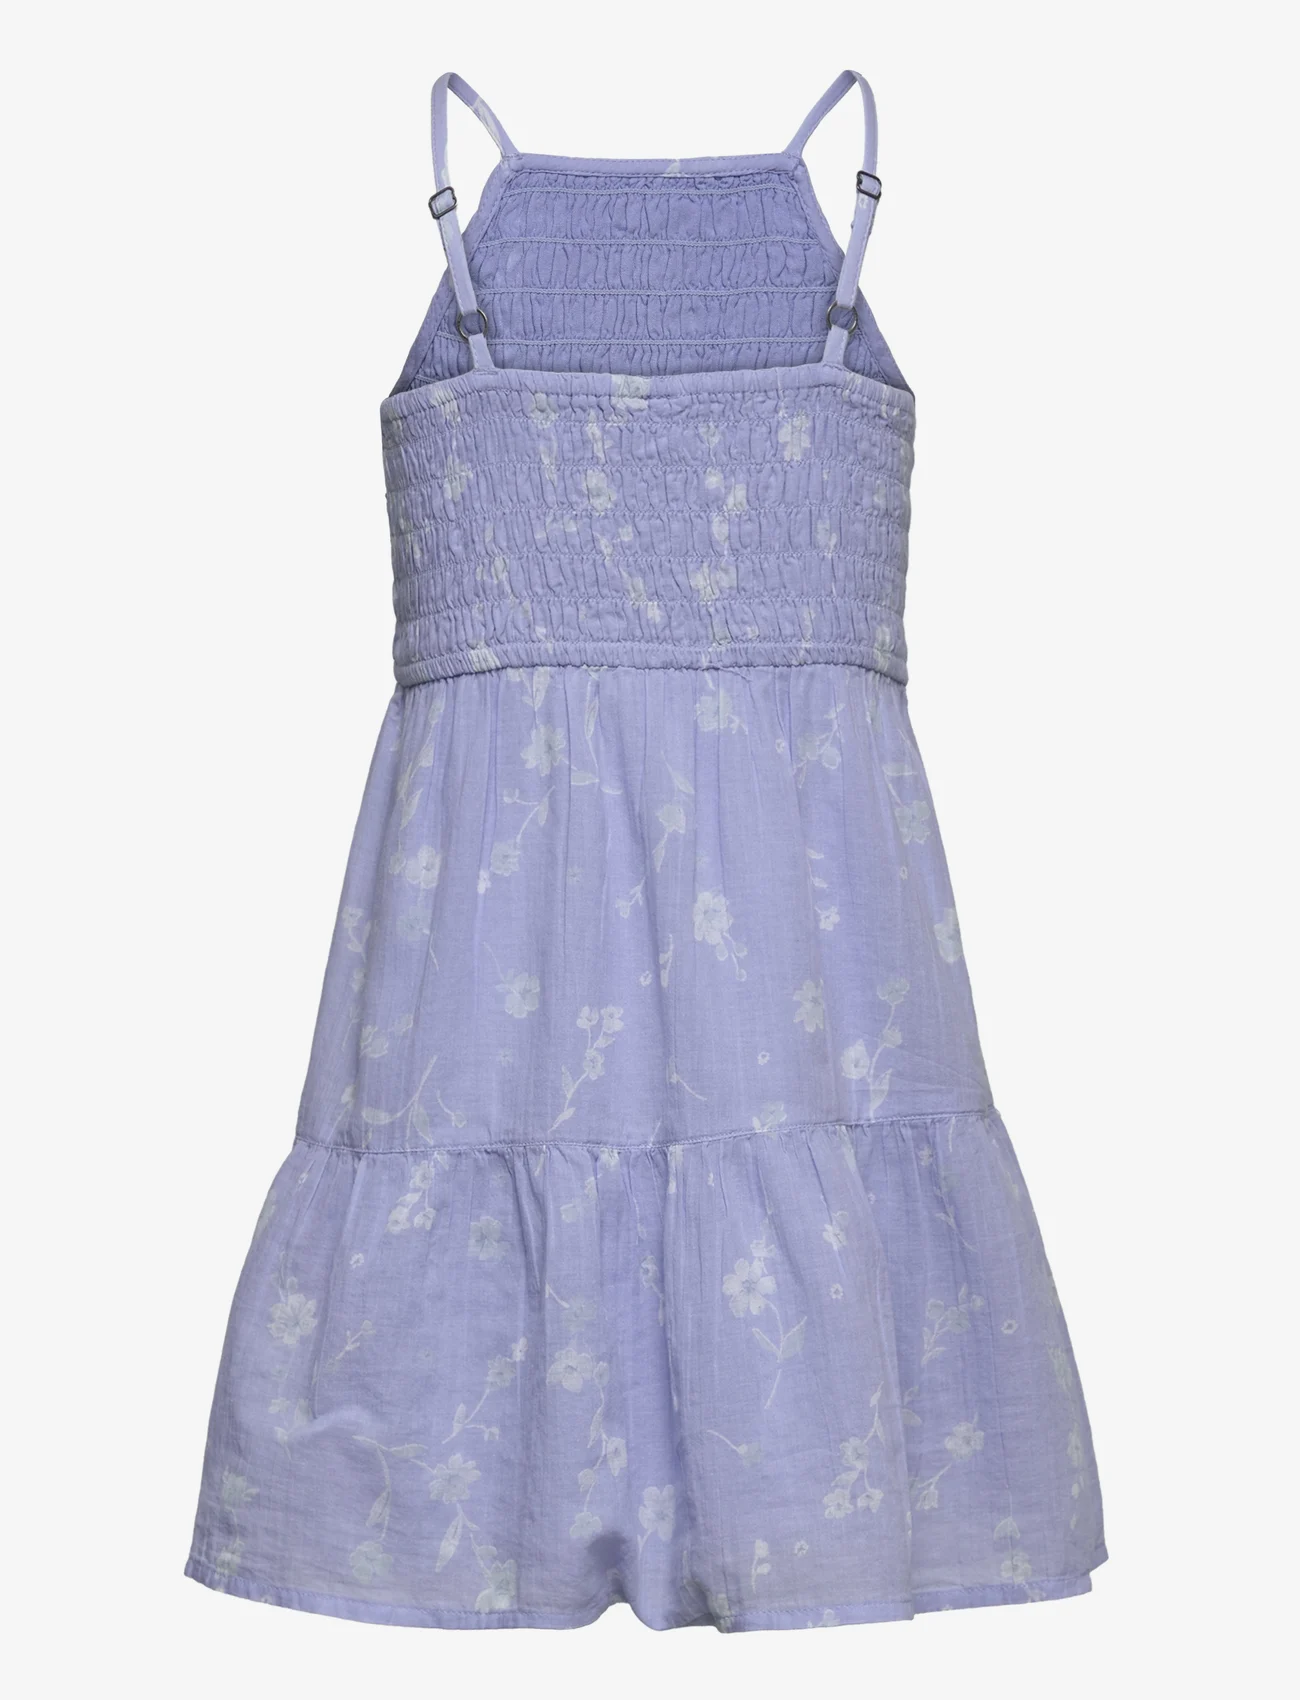 Abercrombie & Fitch - kids GIRLS DRESSES - short-sleeved casual dresses - blue floral - 1